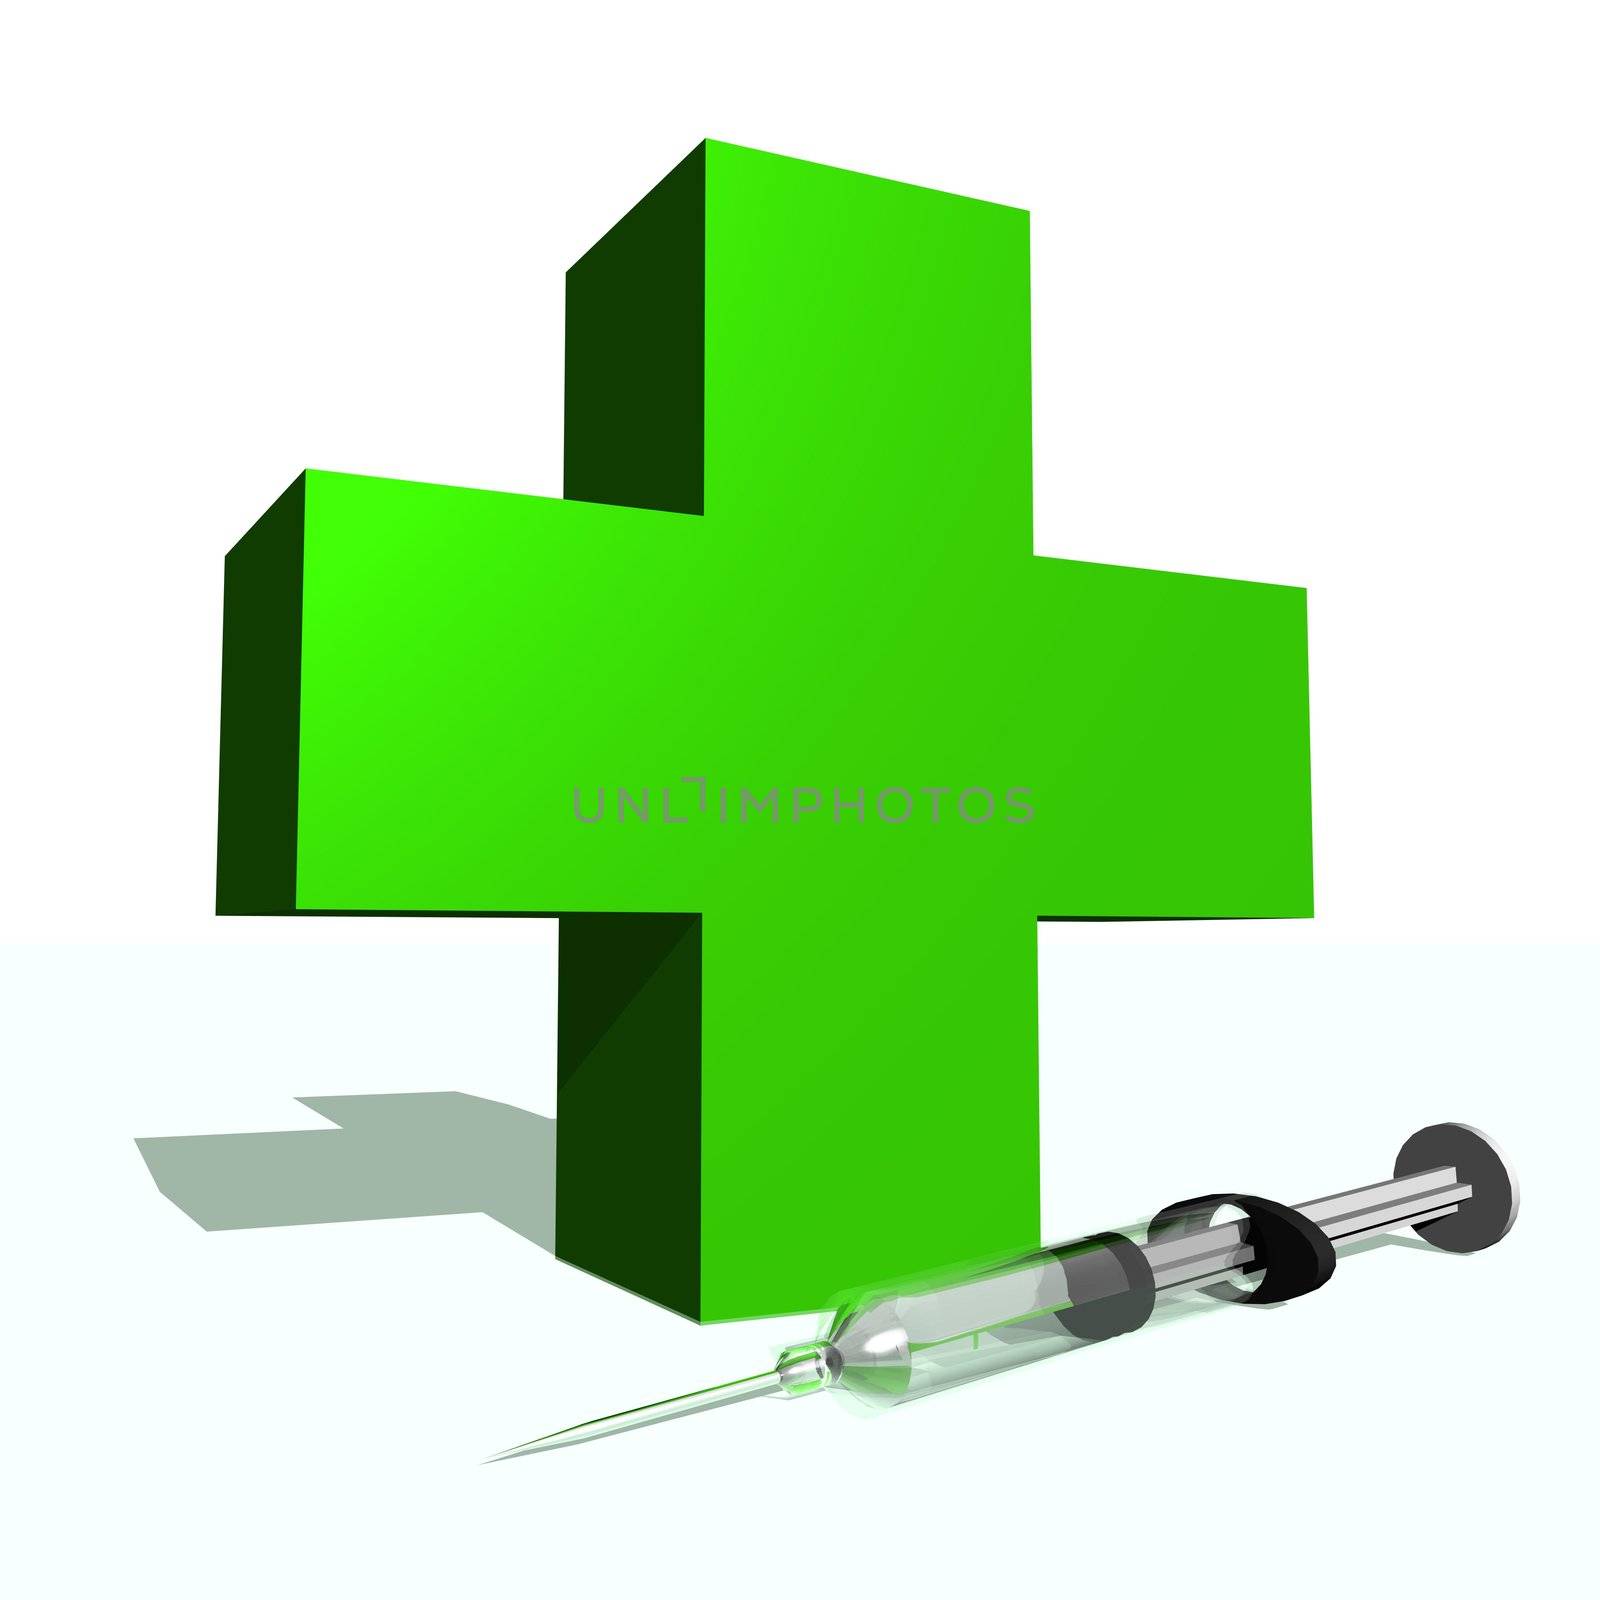 Big green cross and syringe in white background